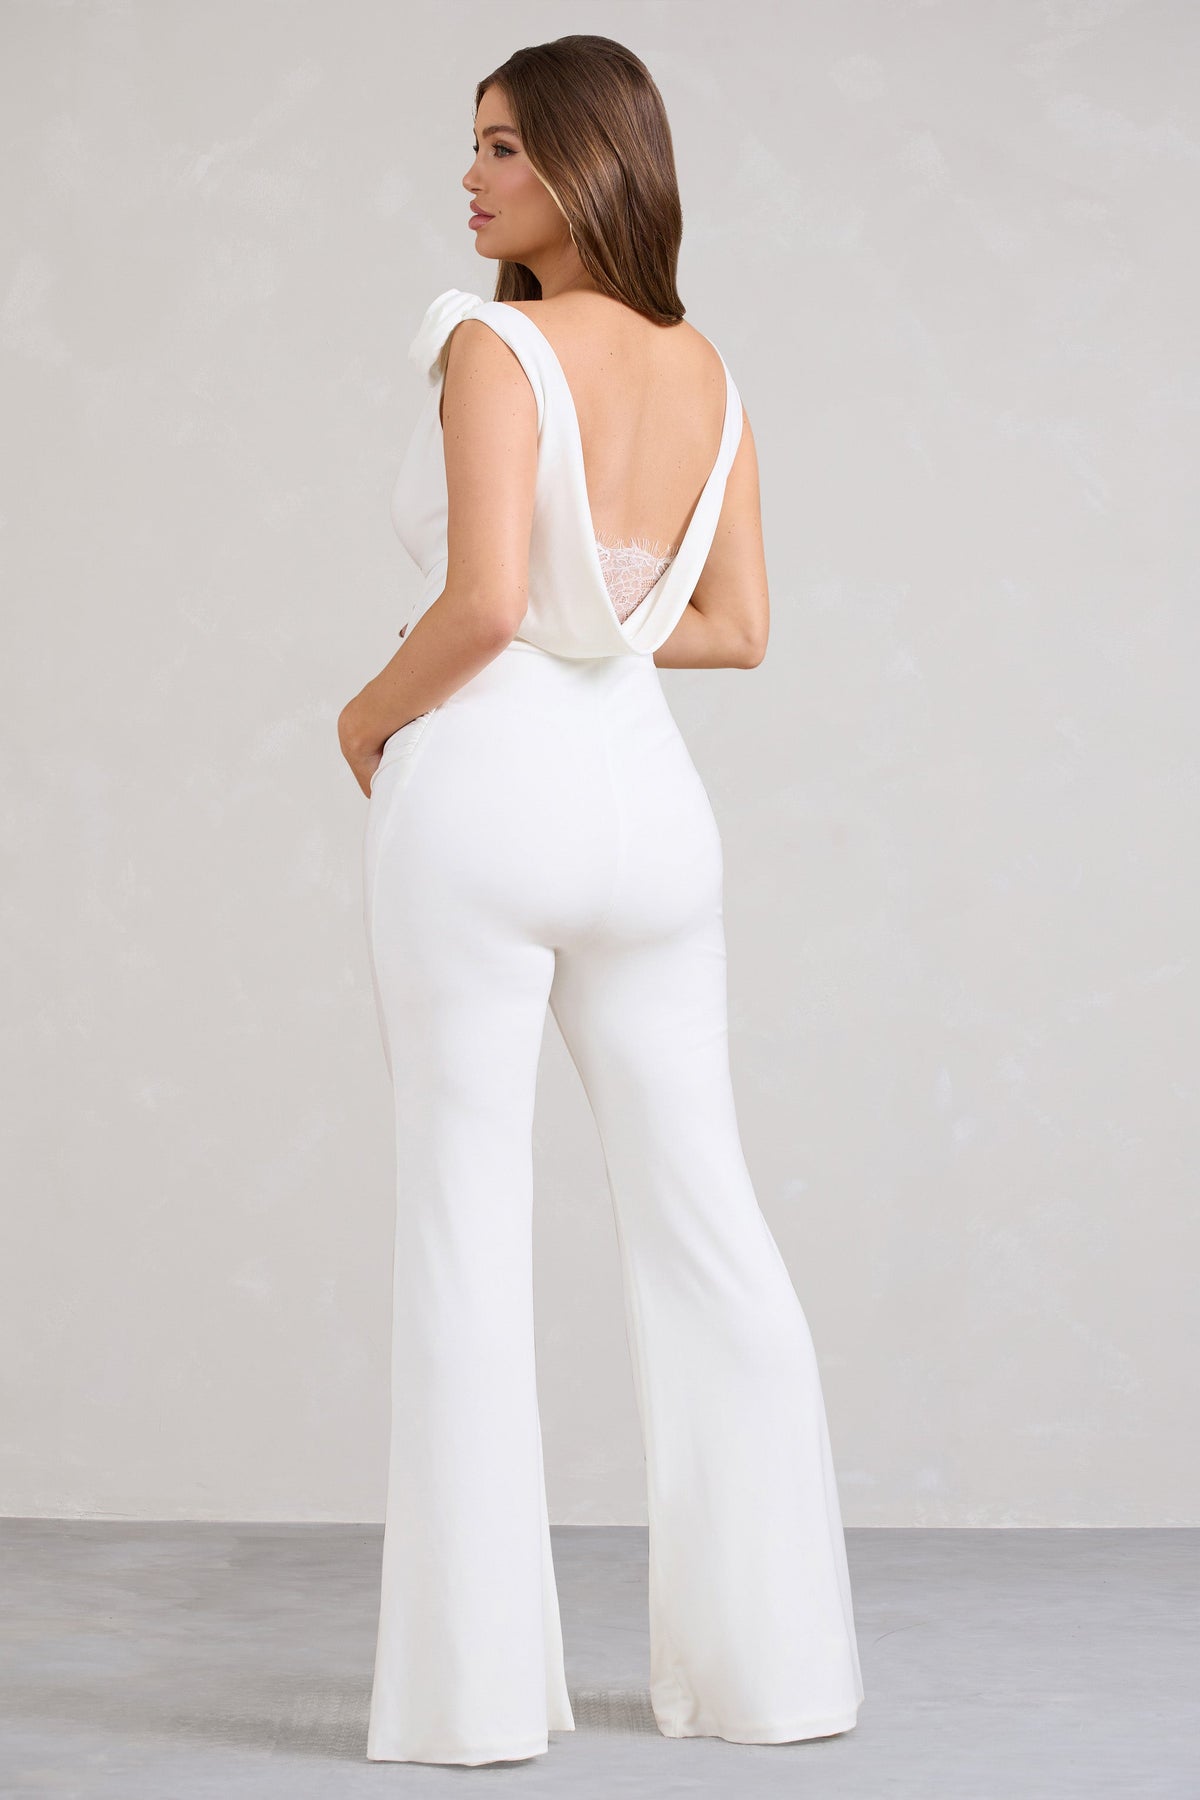 Posy White Maternity Cowl Jumpsuit With Flower Design – Club L London - USA